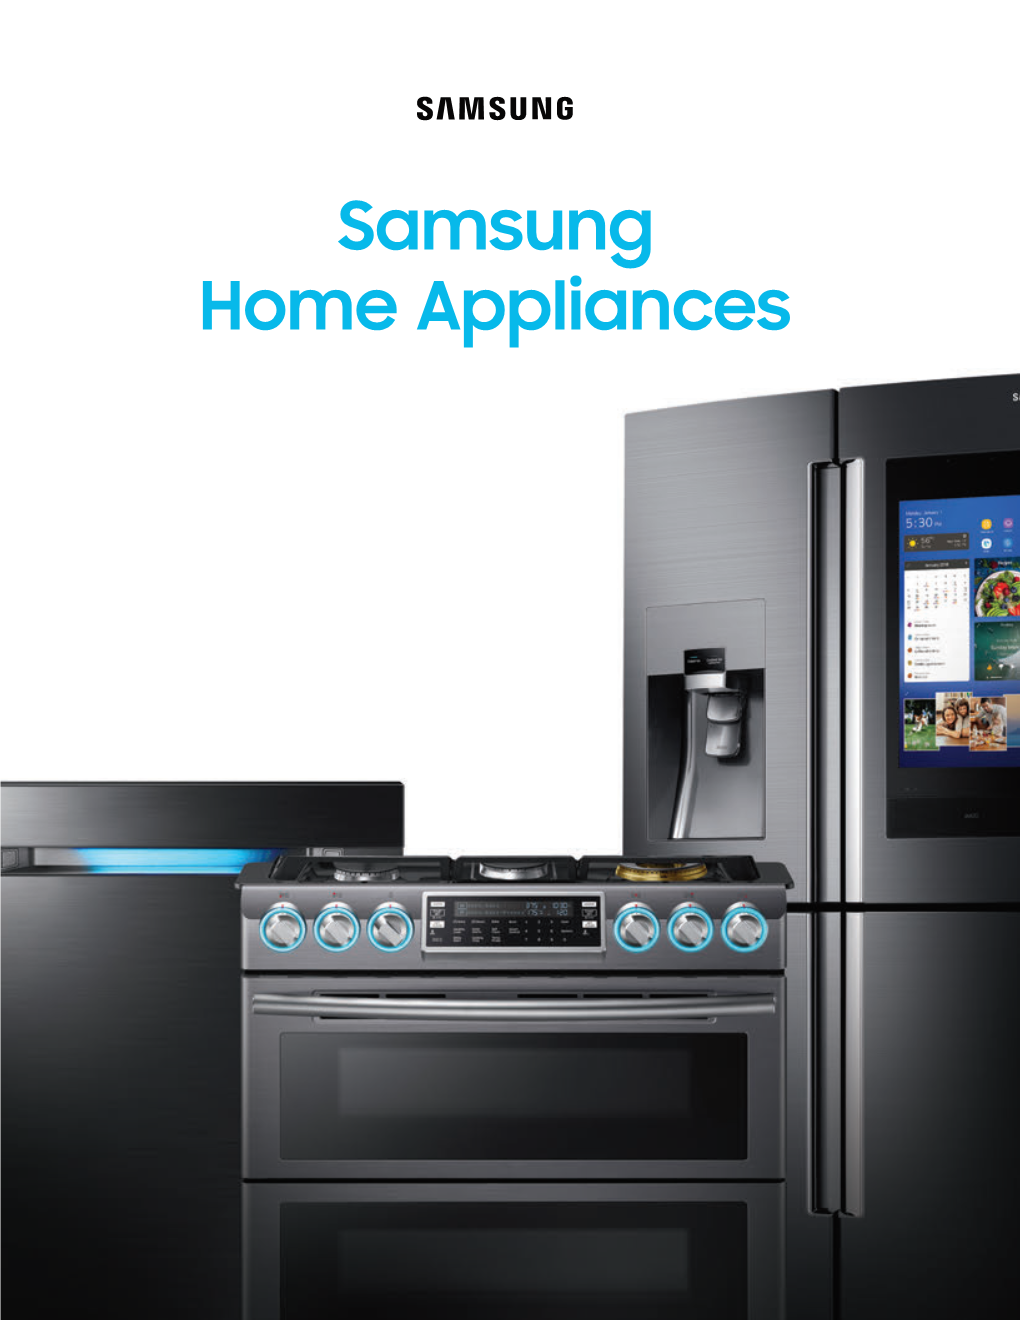 Samsung Home Appliances the New Normal Is Now